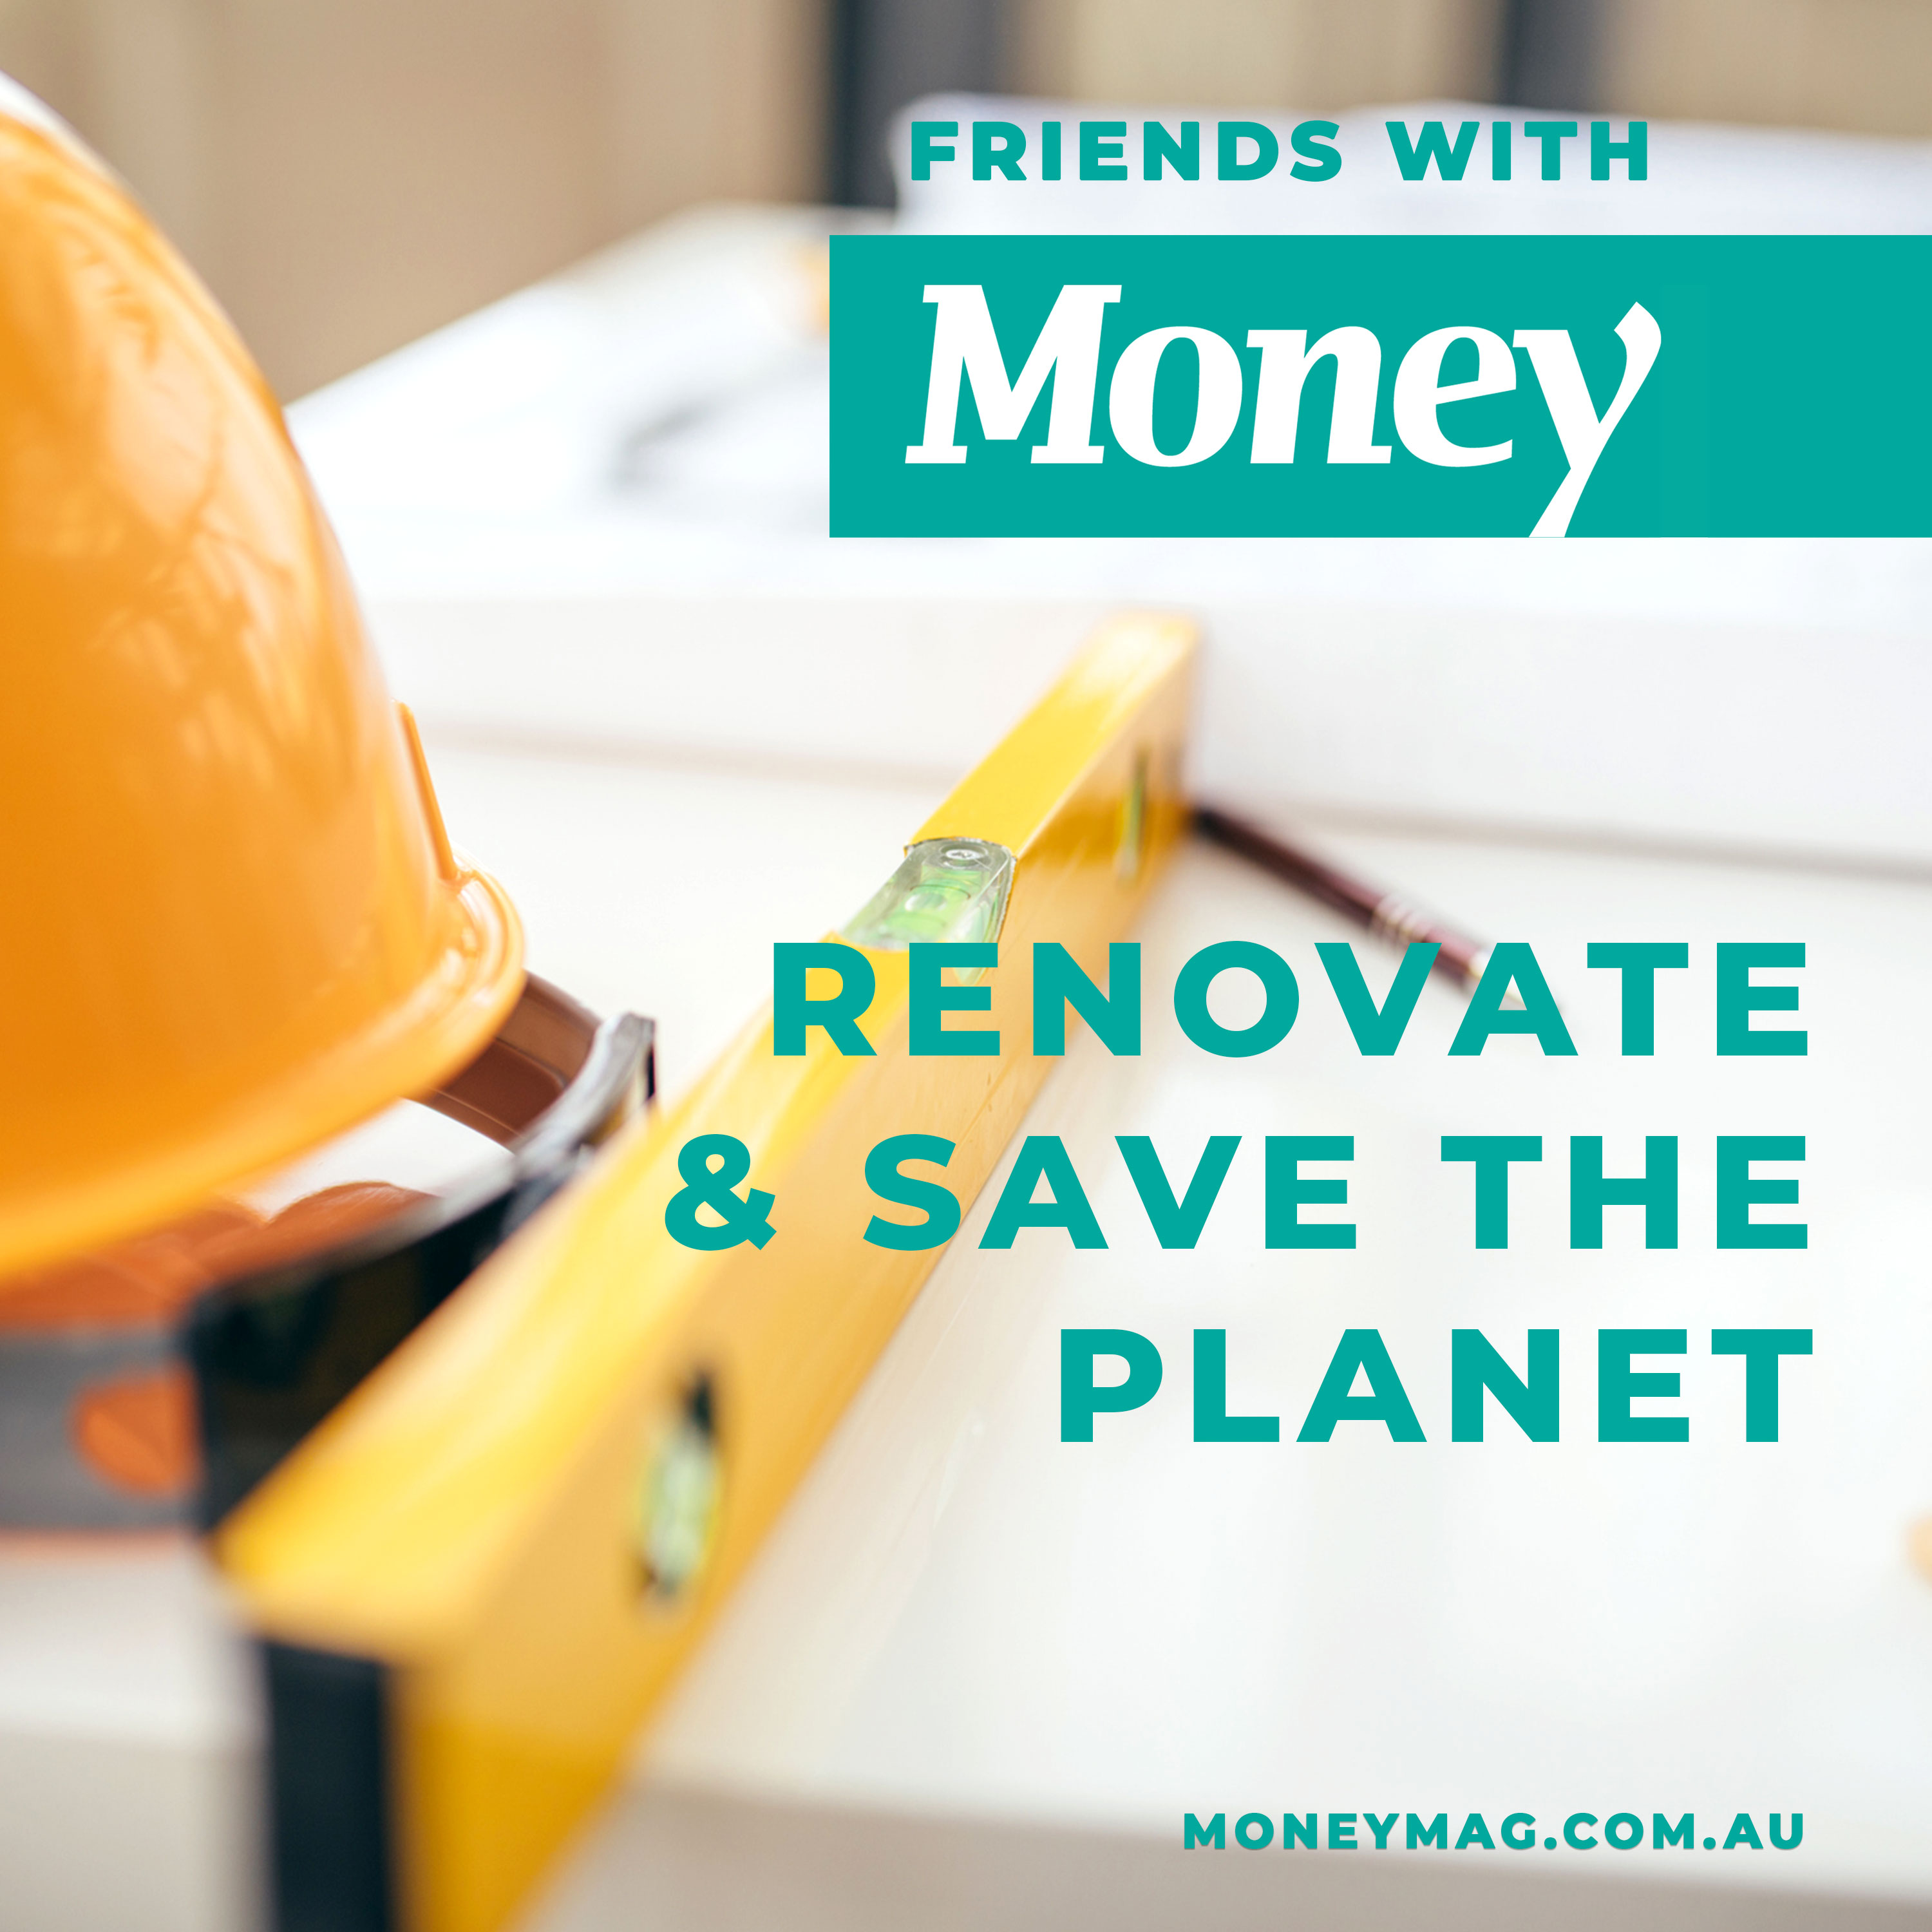 Renovate and save the planet